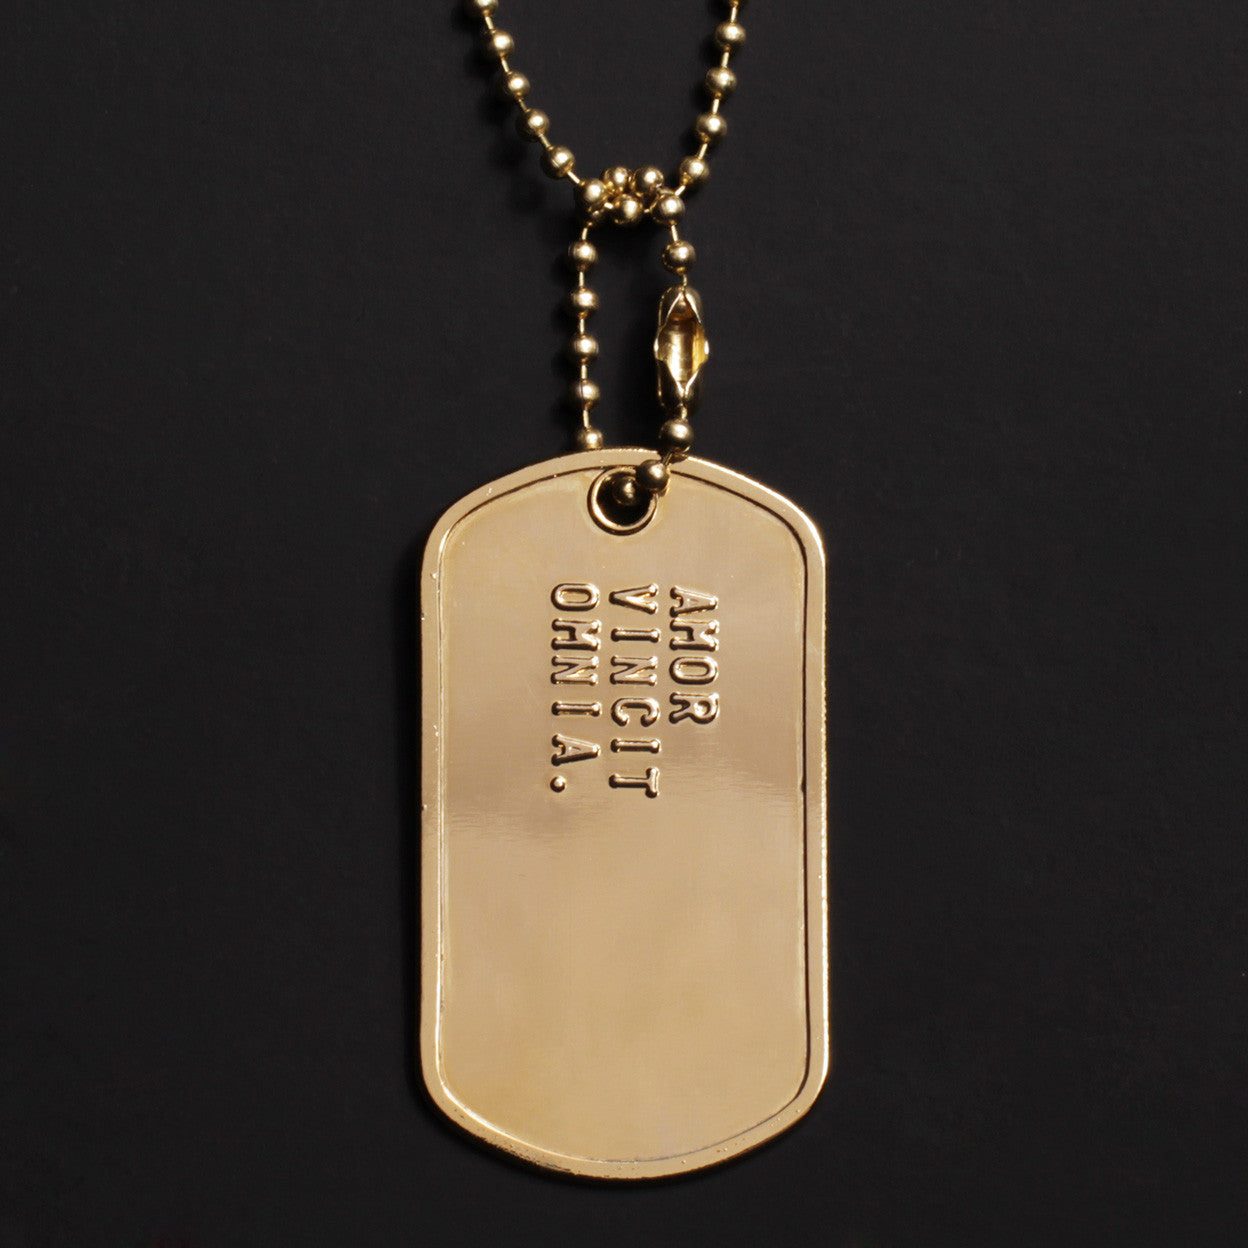 Dog tag necklaces coming back!